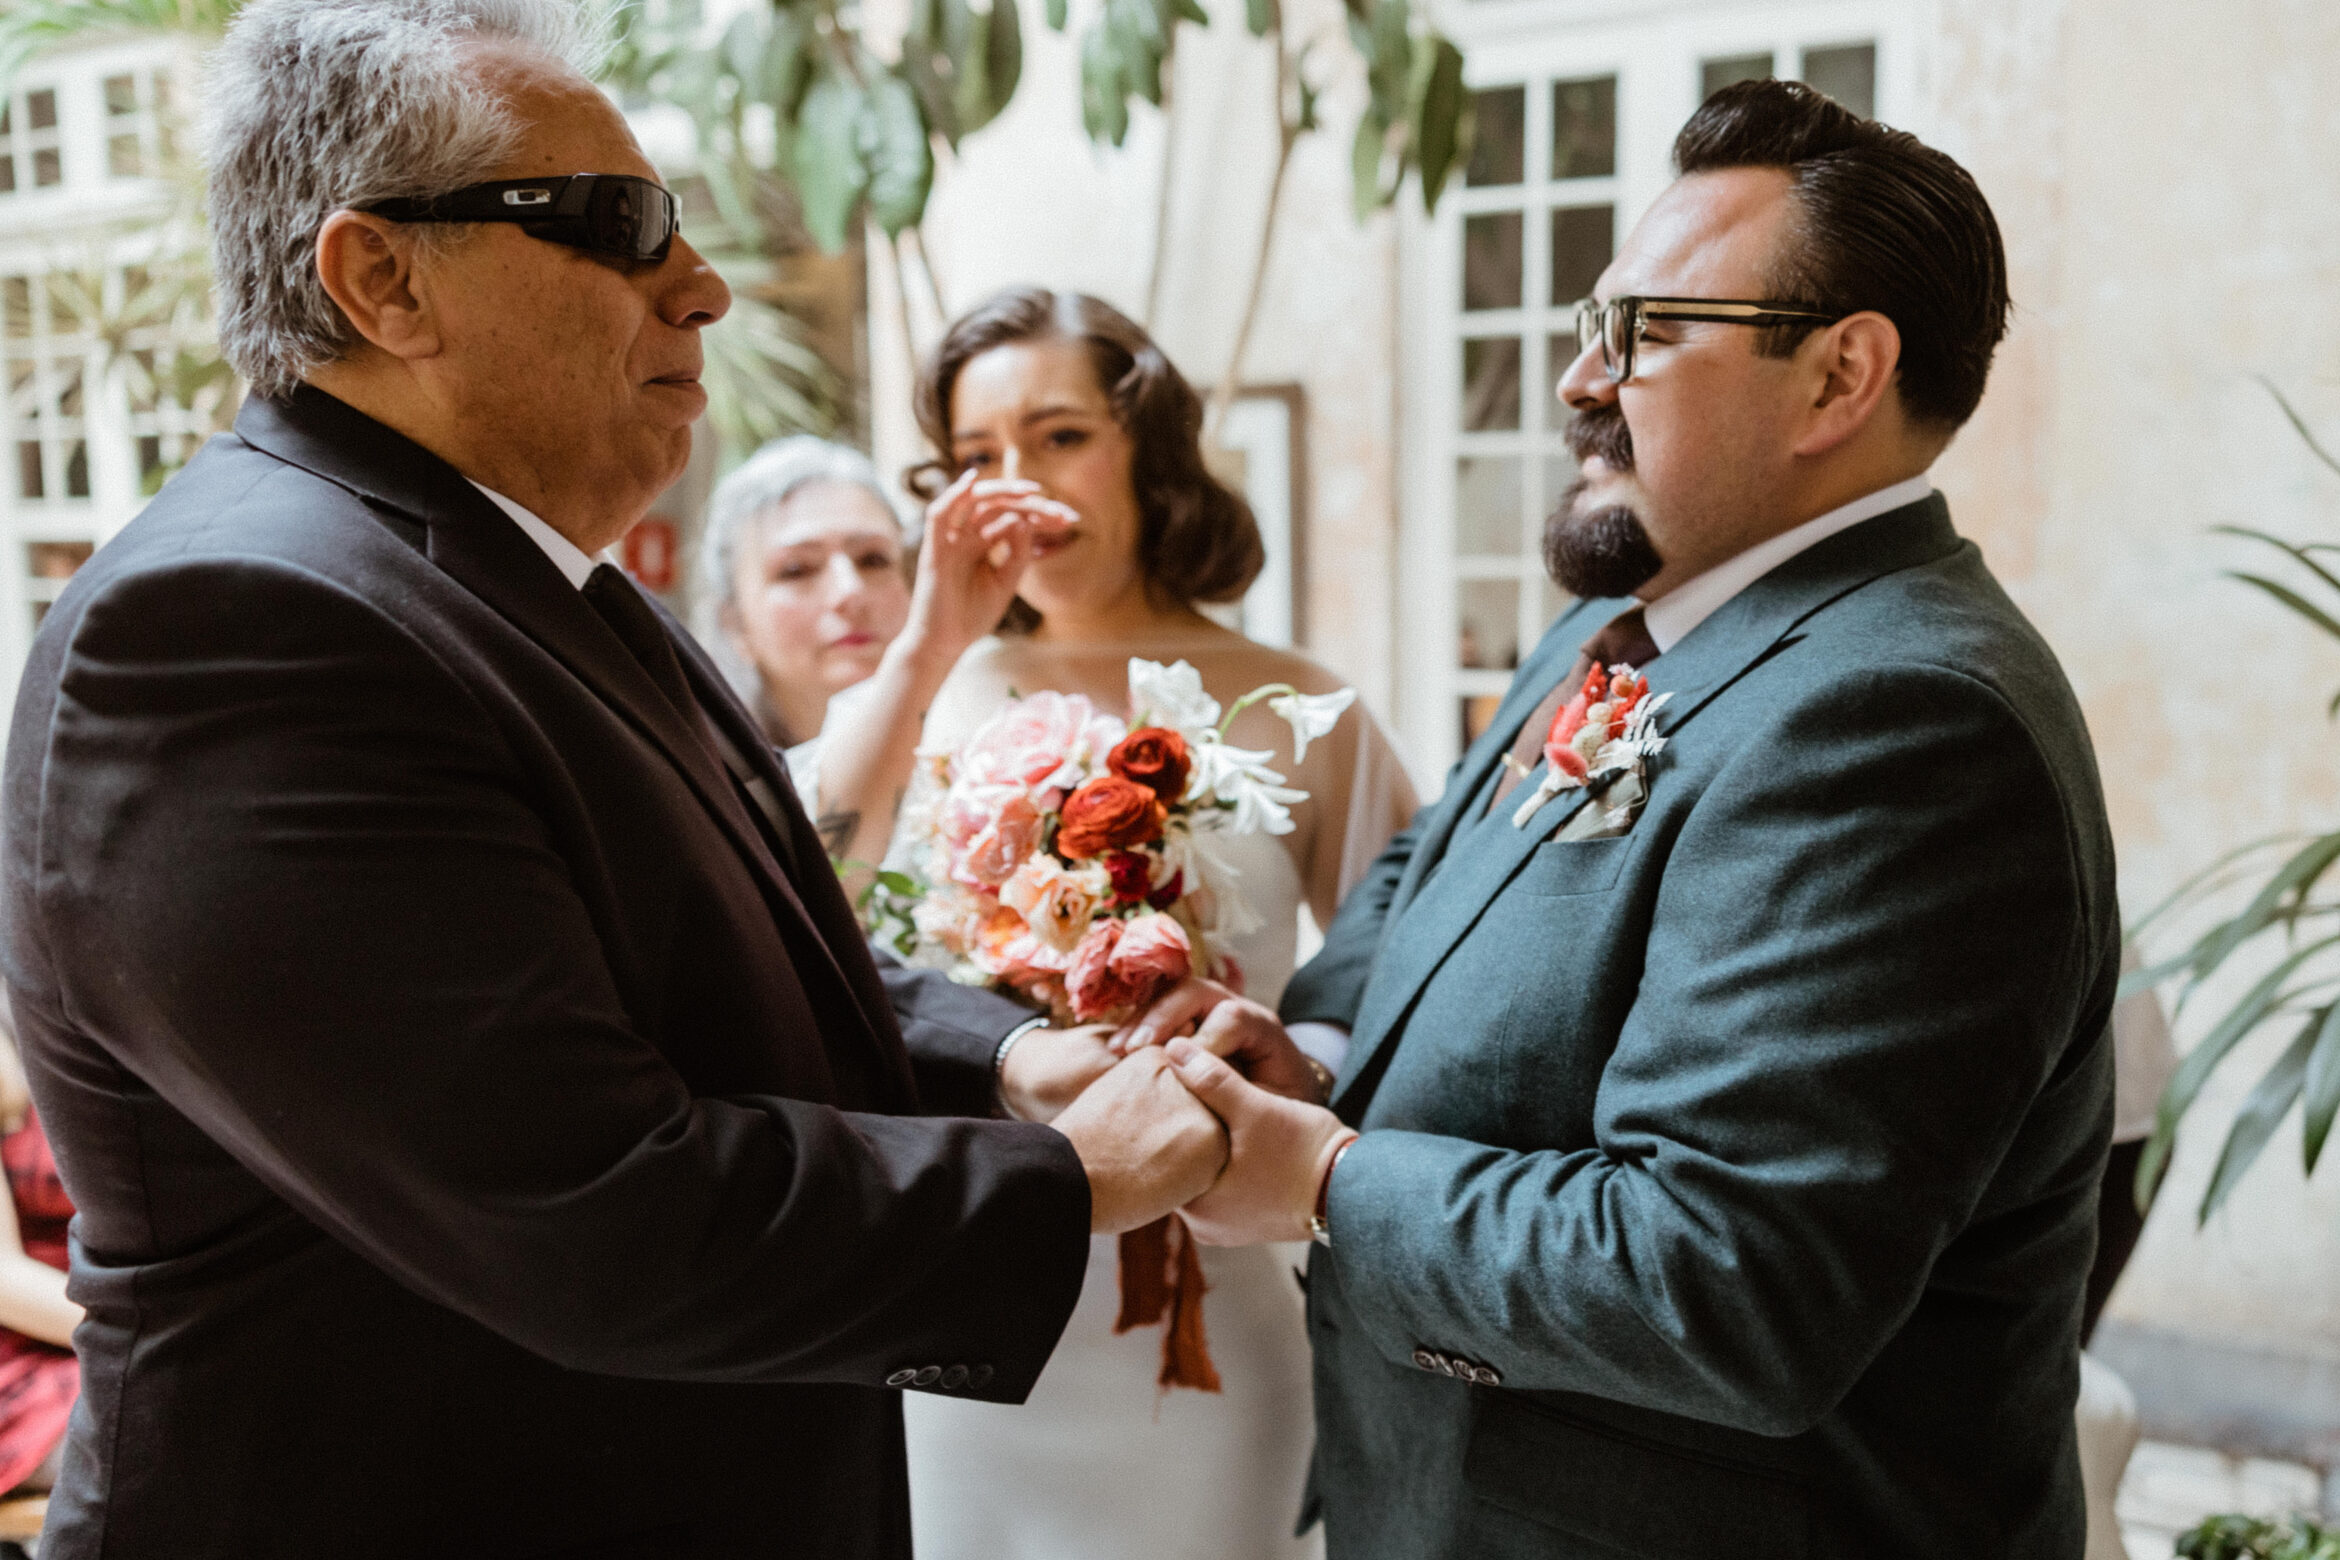 The stunning brides father gives his daughter away at the end of the aisle